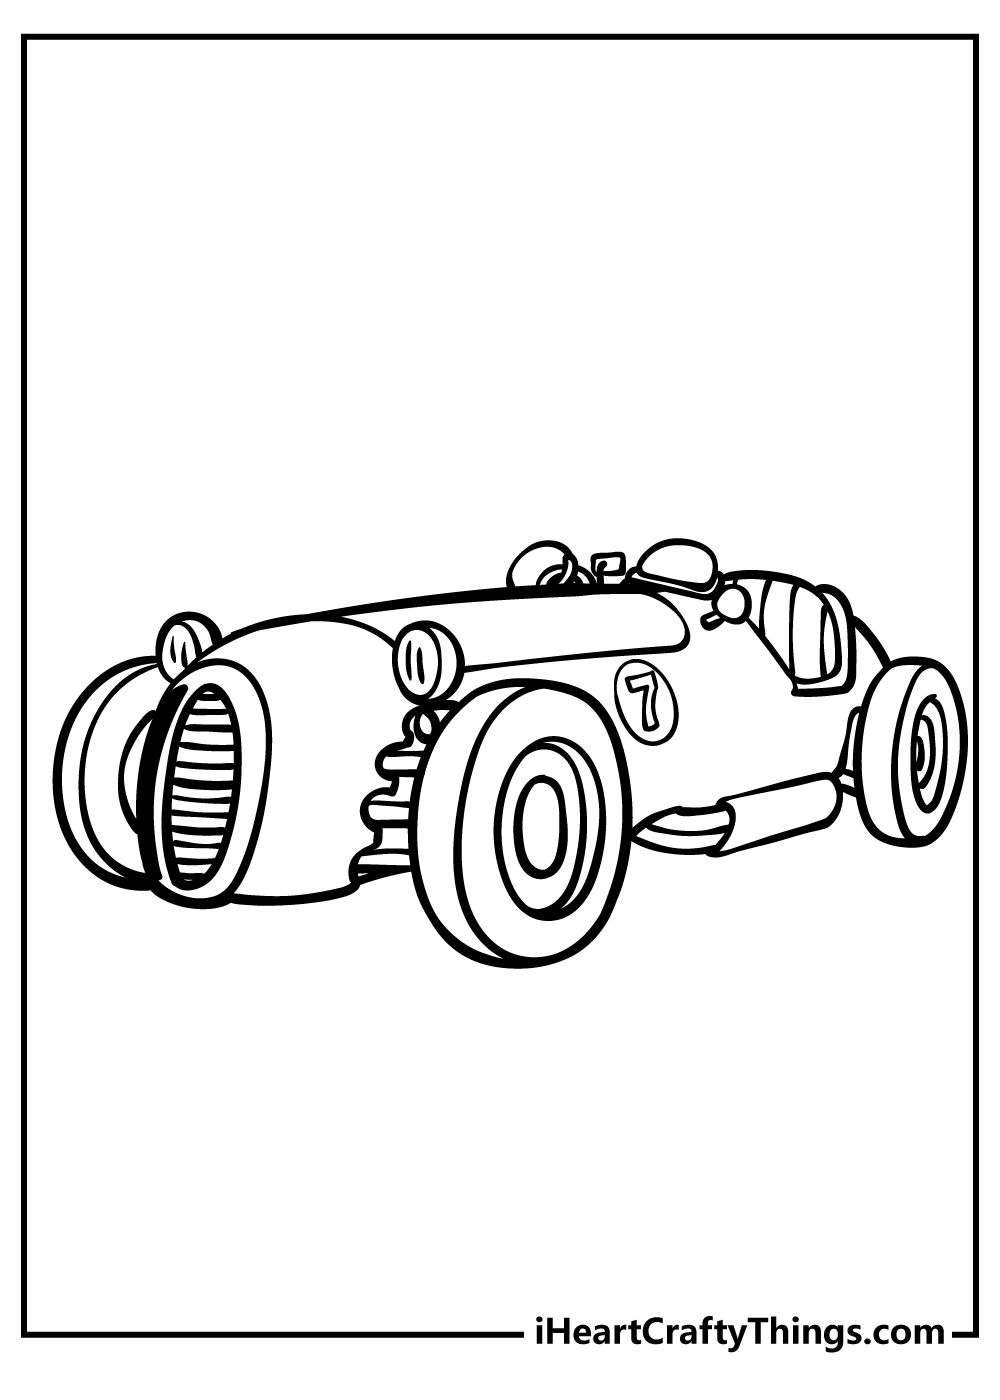 Race Car Coloring Pages for preschoolers free printable